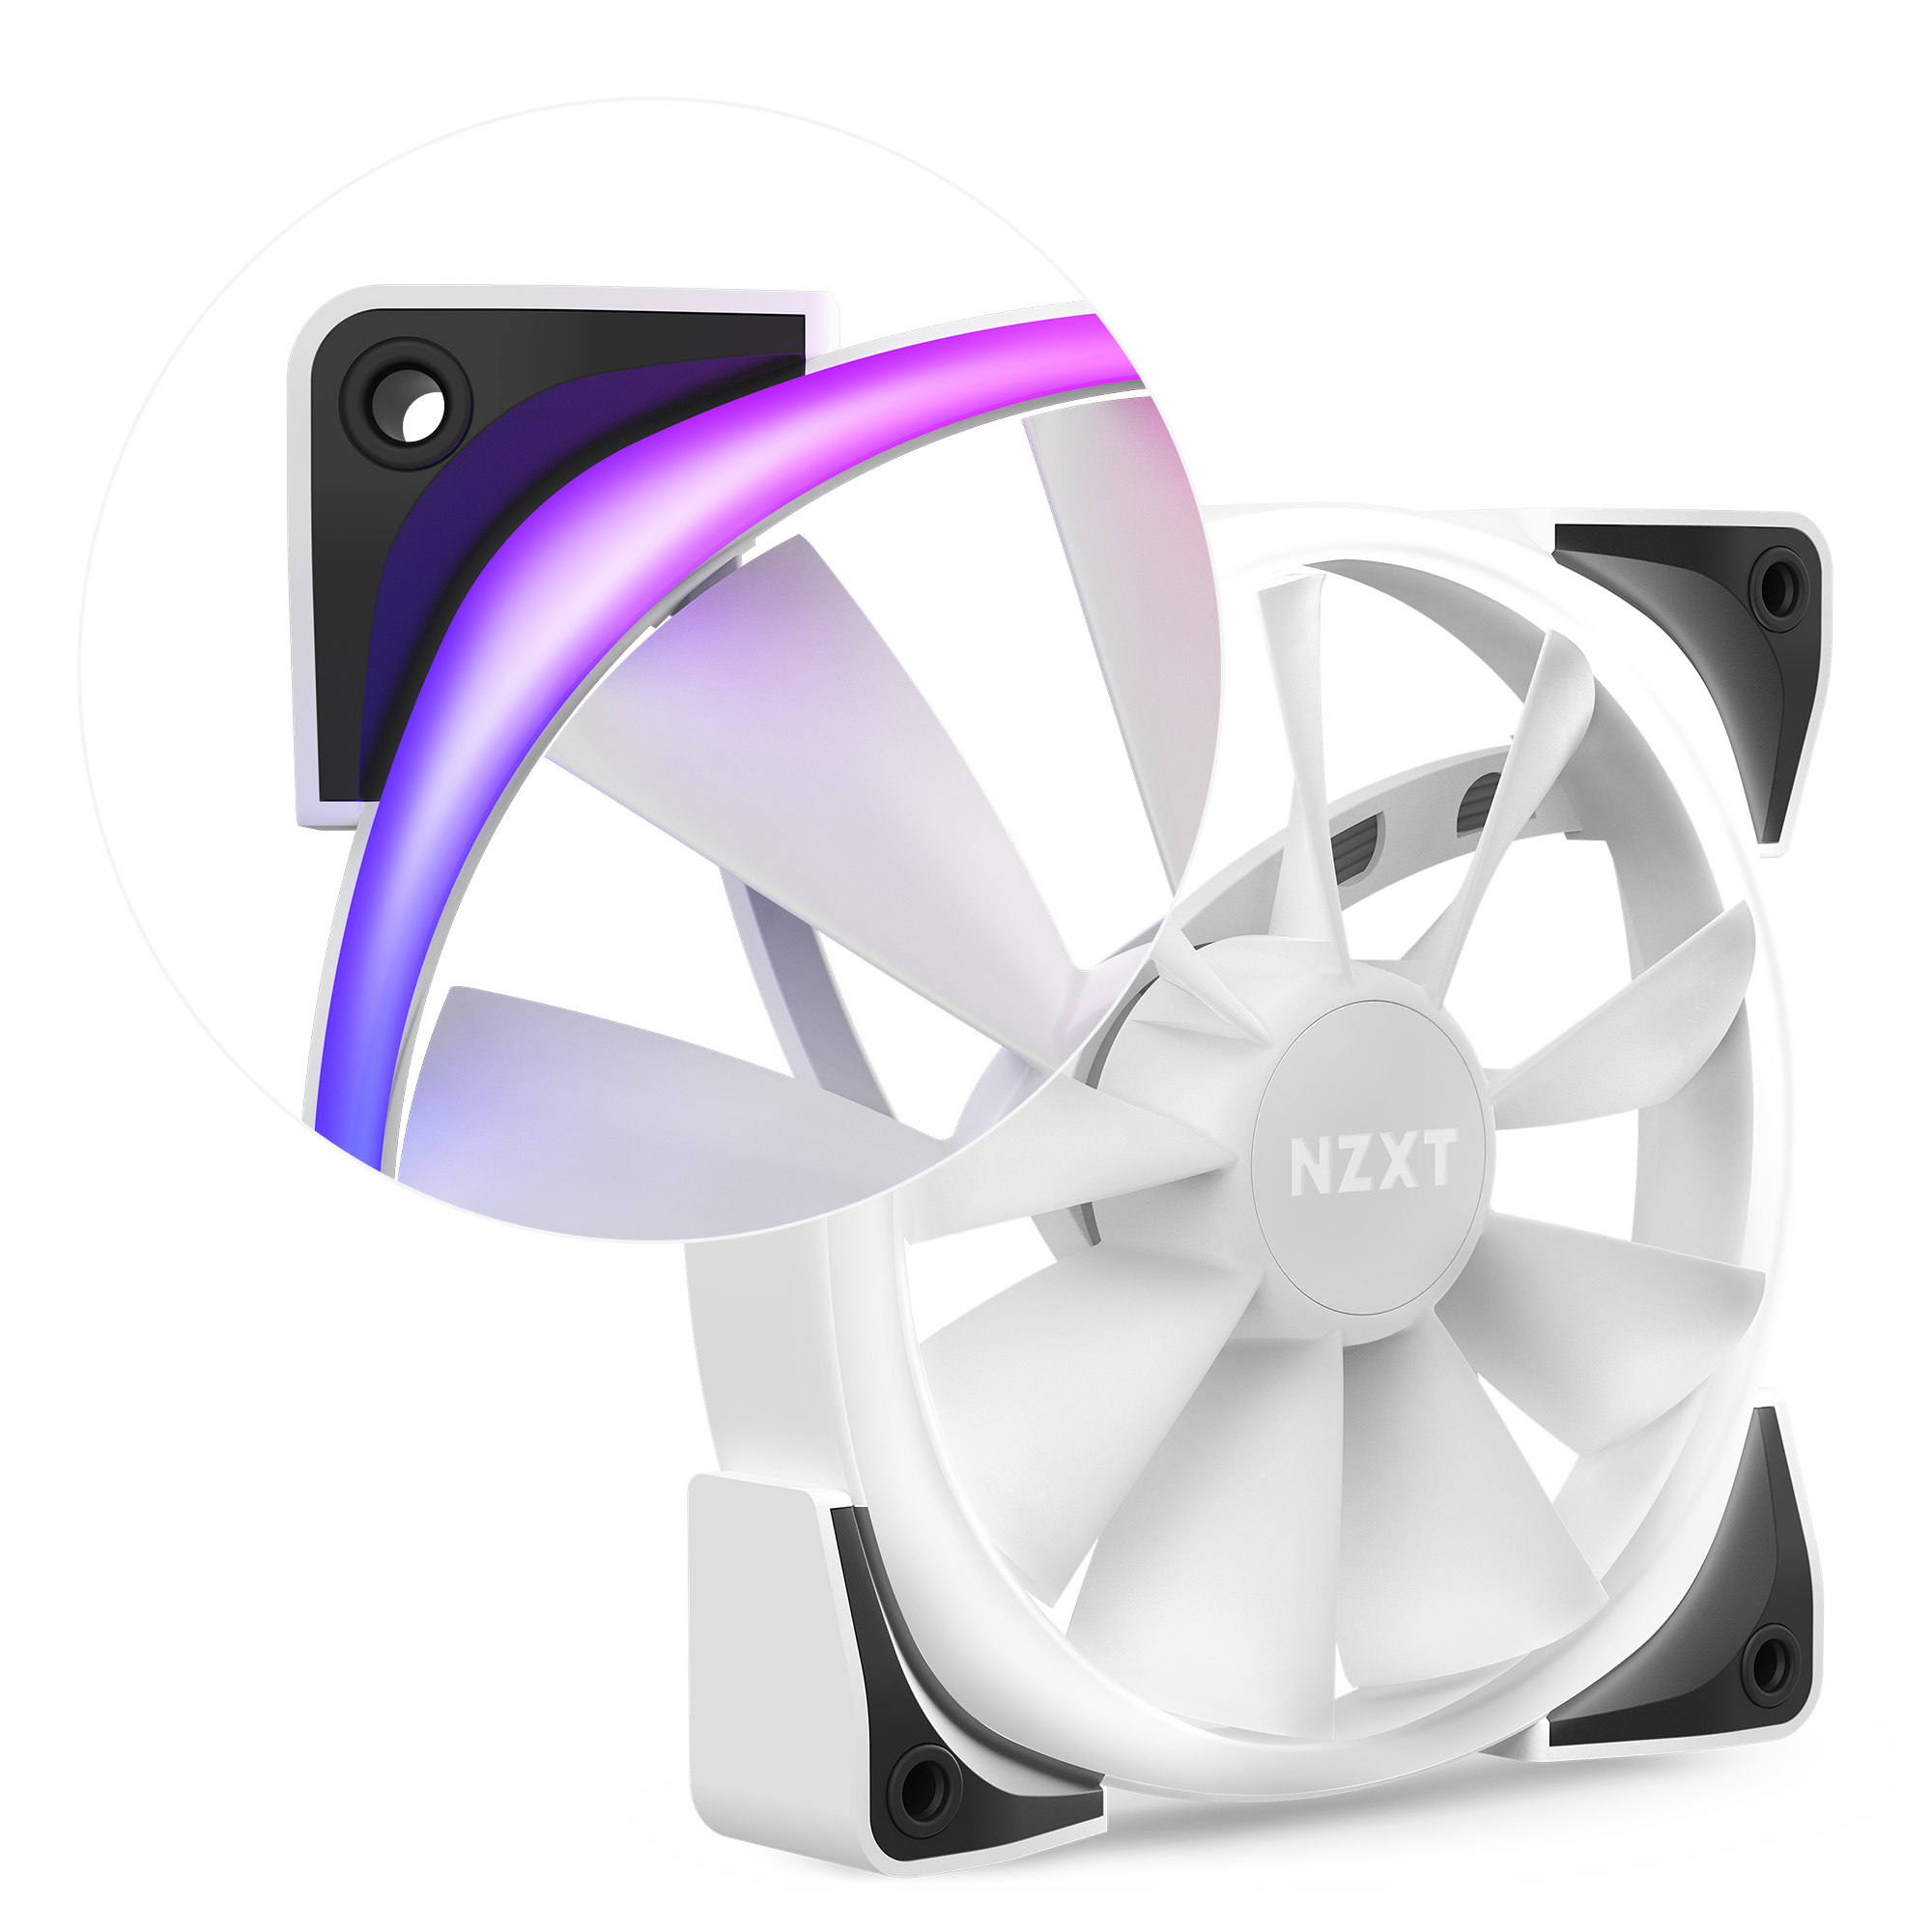 Kraken Z | CPU Coolers | PC Components | Gaming PCs | NZXT